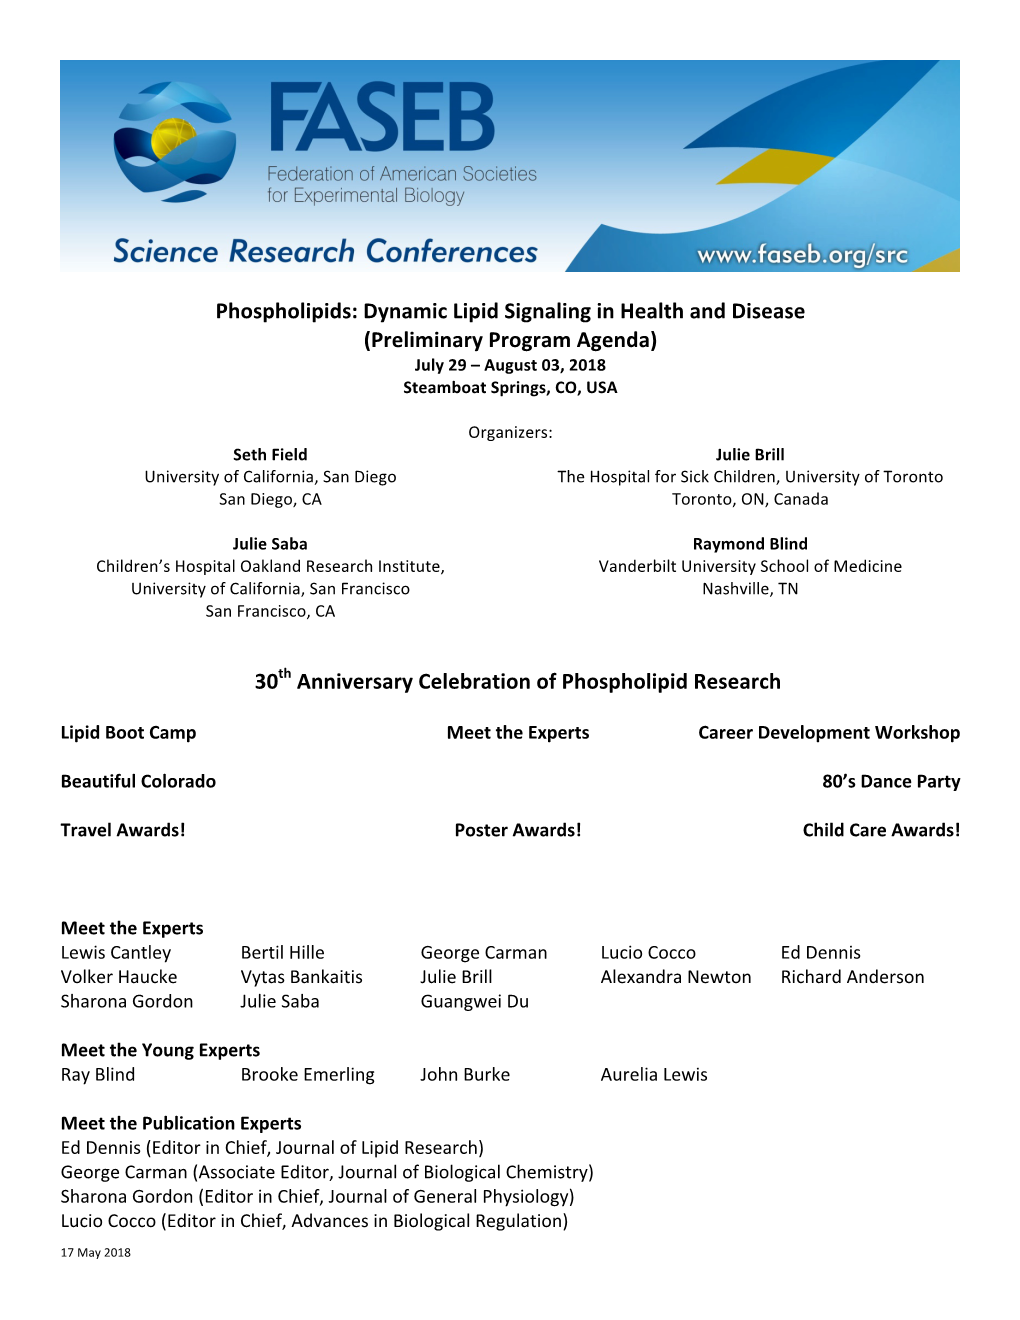 Phospholipids: Dynamic Lipid Signaling in Health and Disease (Preliminary Program Agenda) July 29 – August 03, 2018 Steamboat Springs, CO, USA